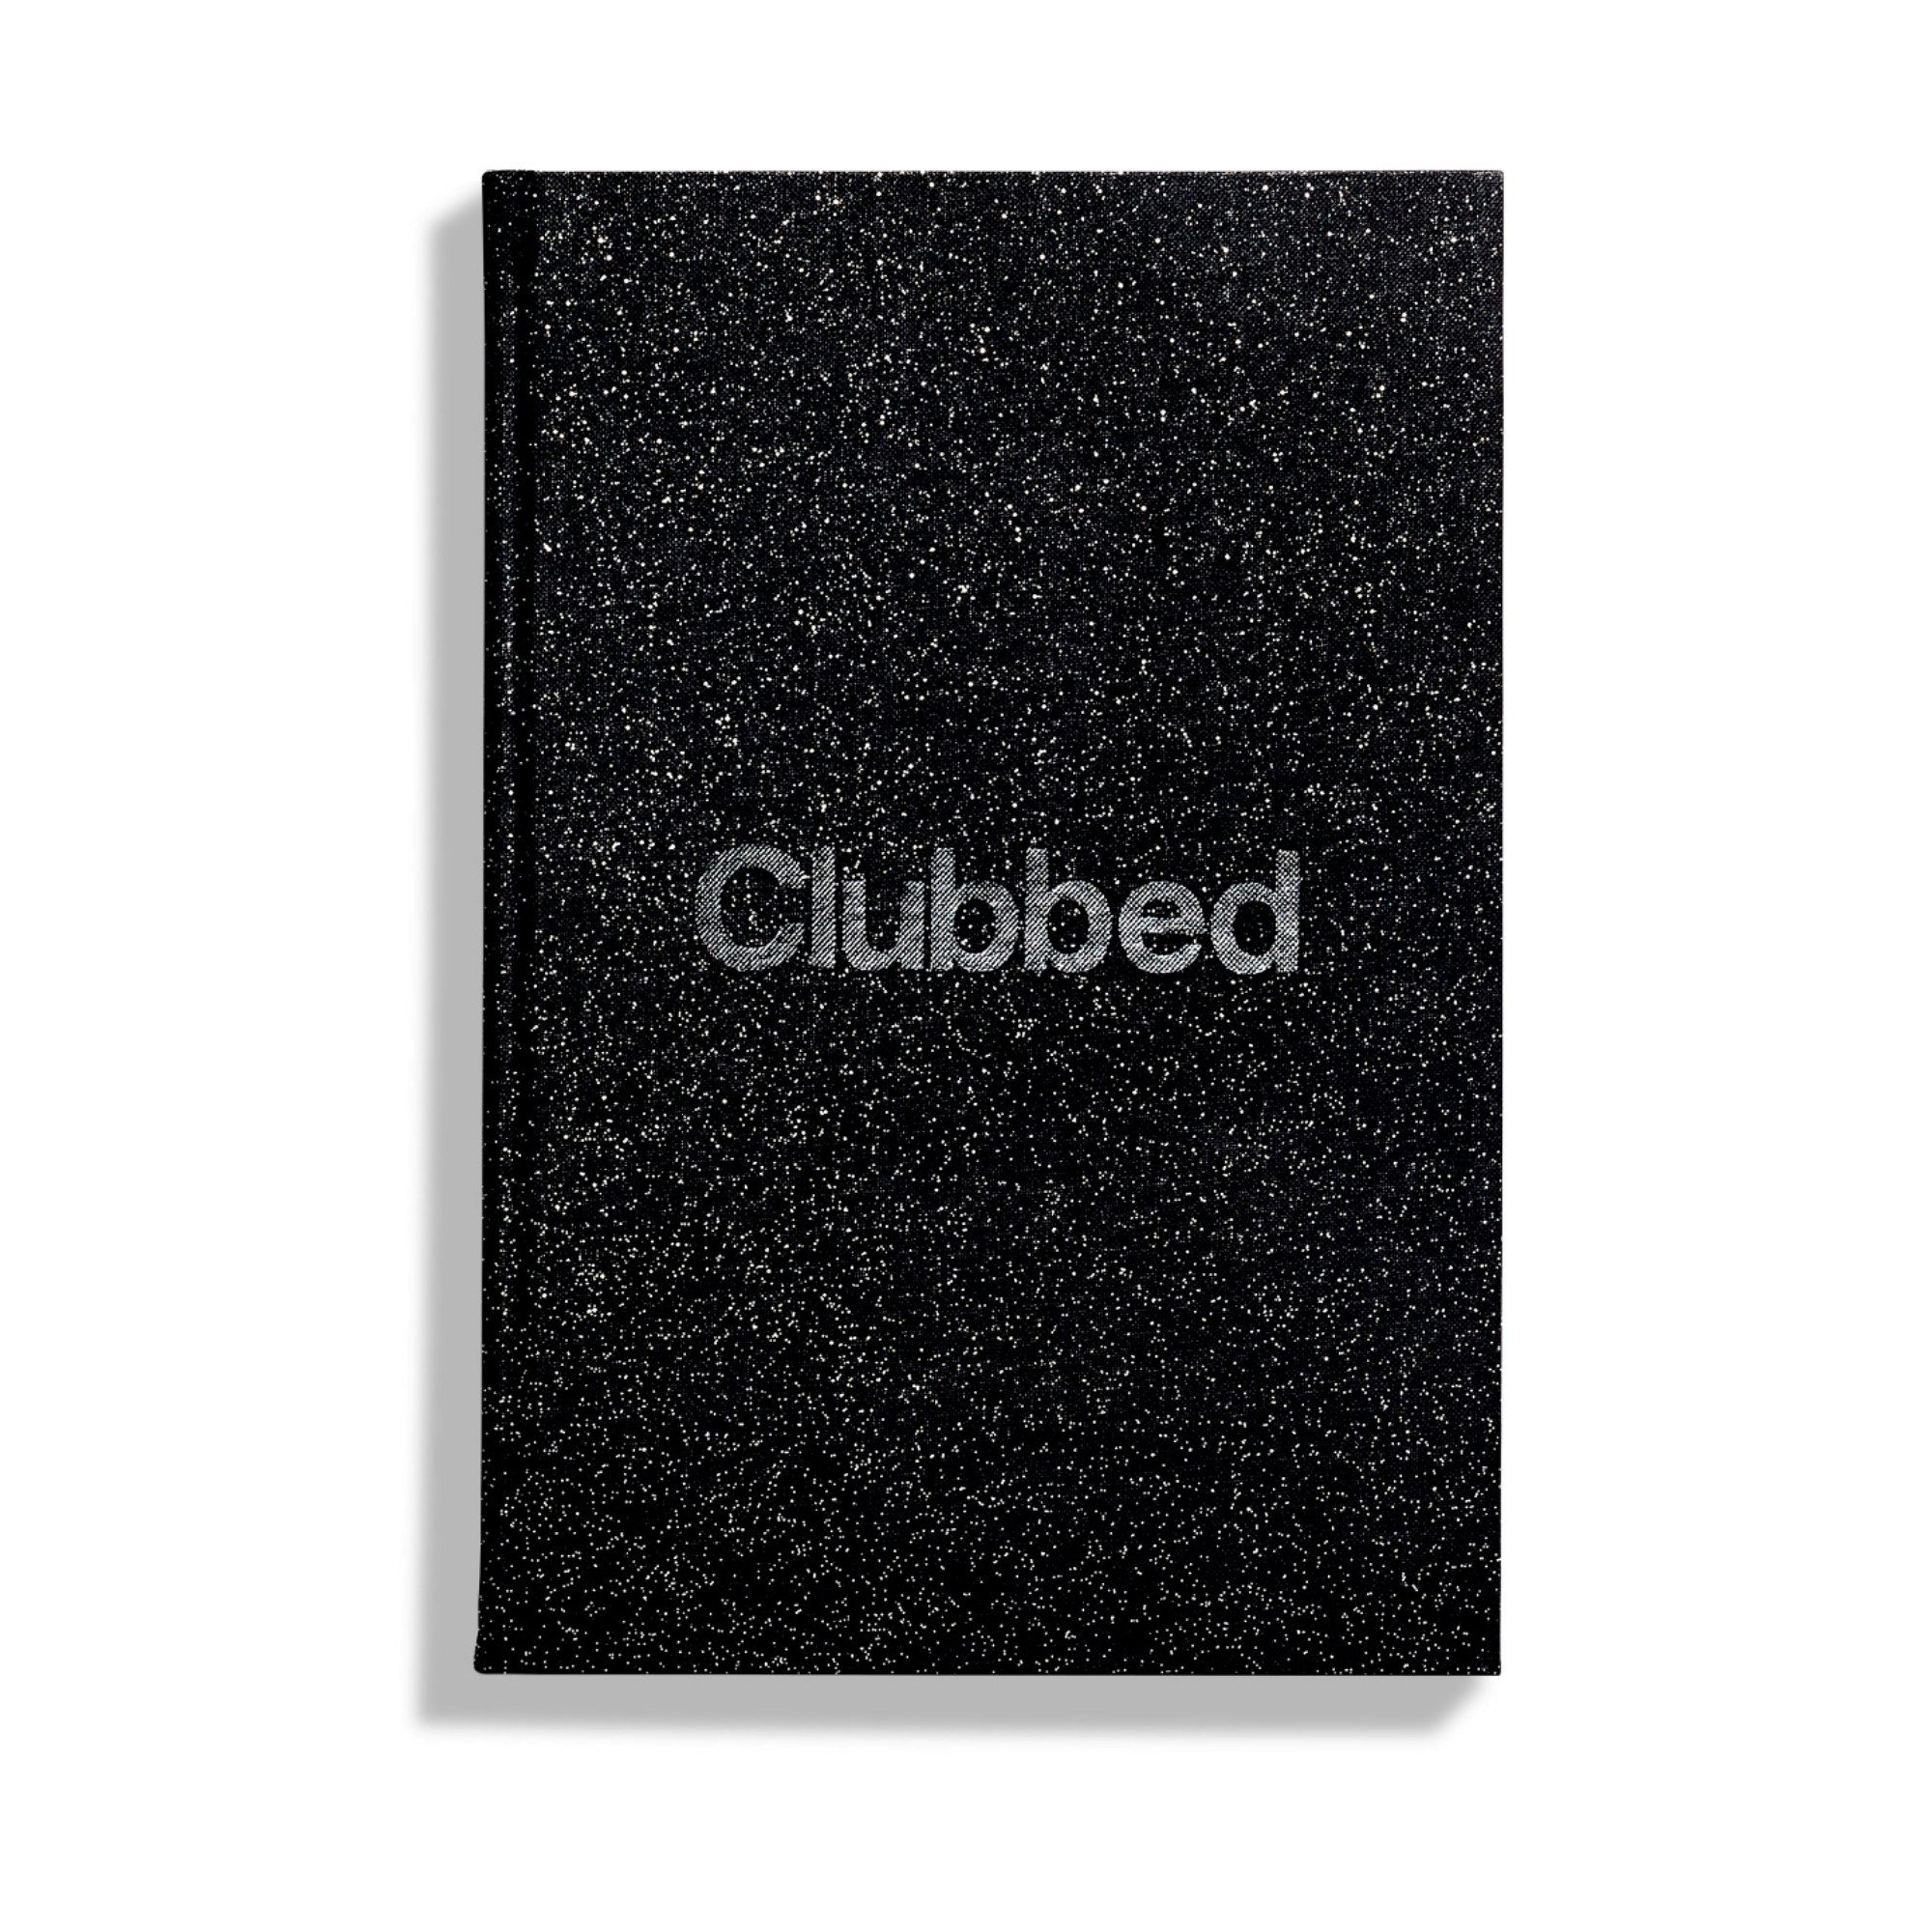 An image of the front cover of Clubbed, a book about nightlife in the UK.